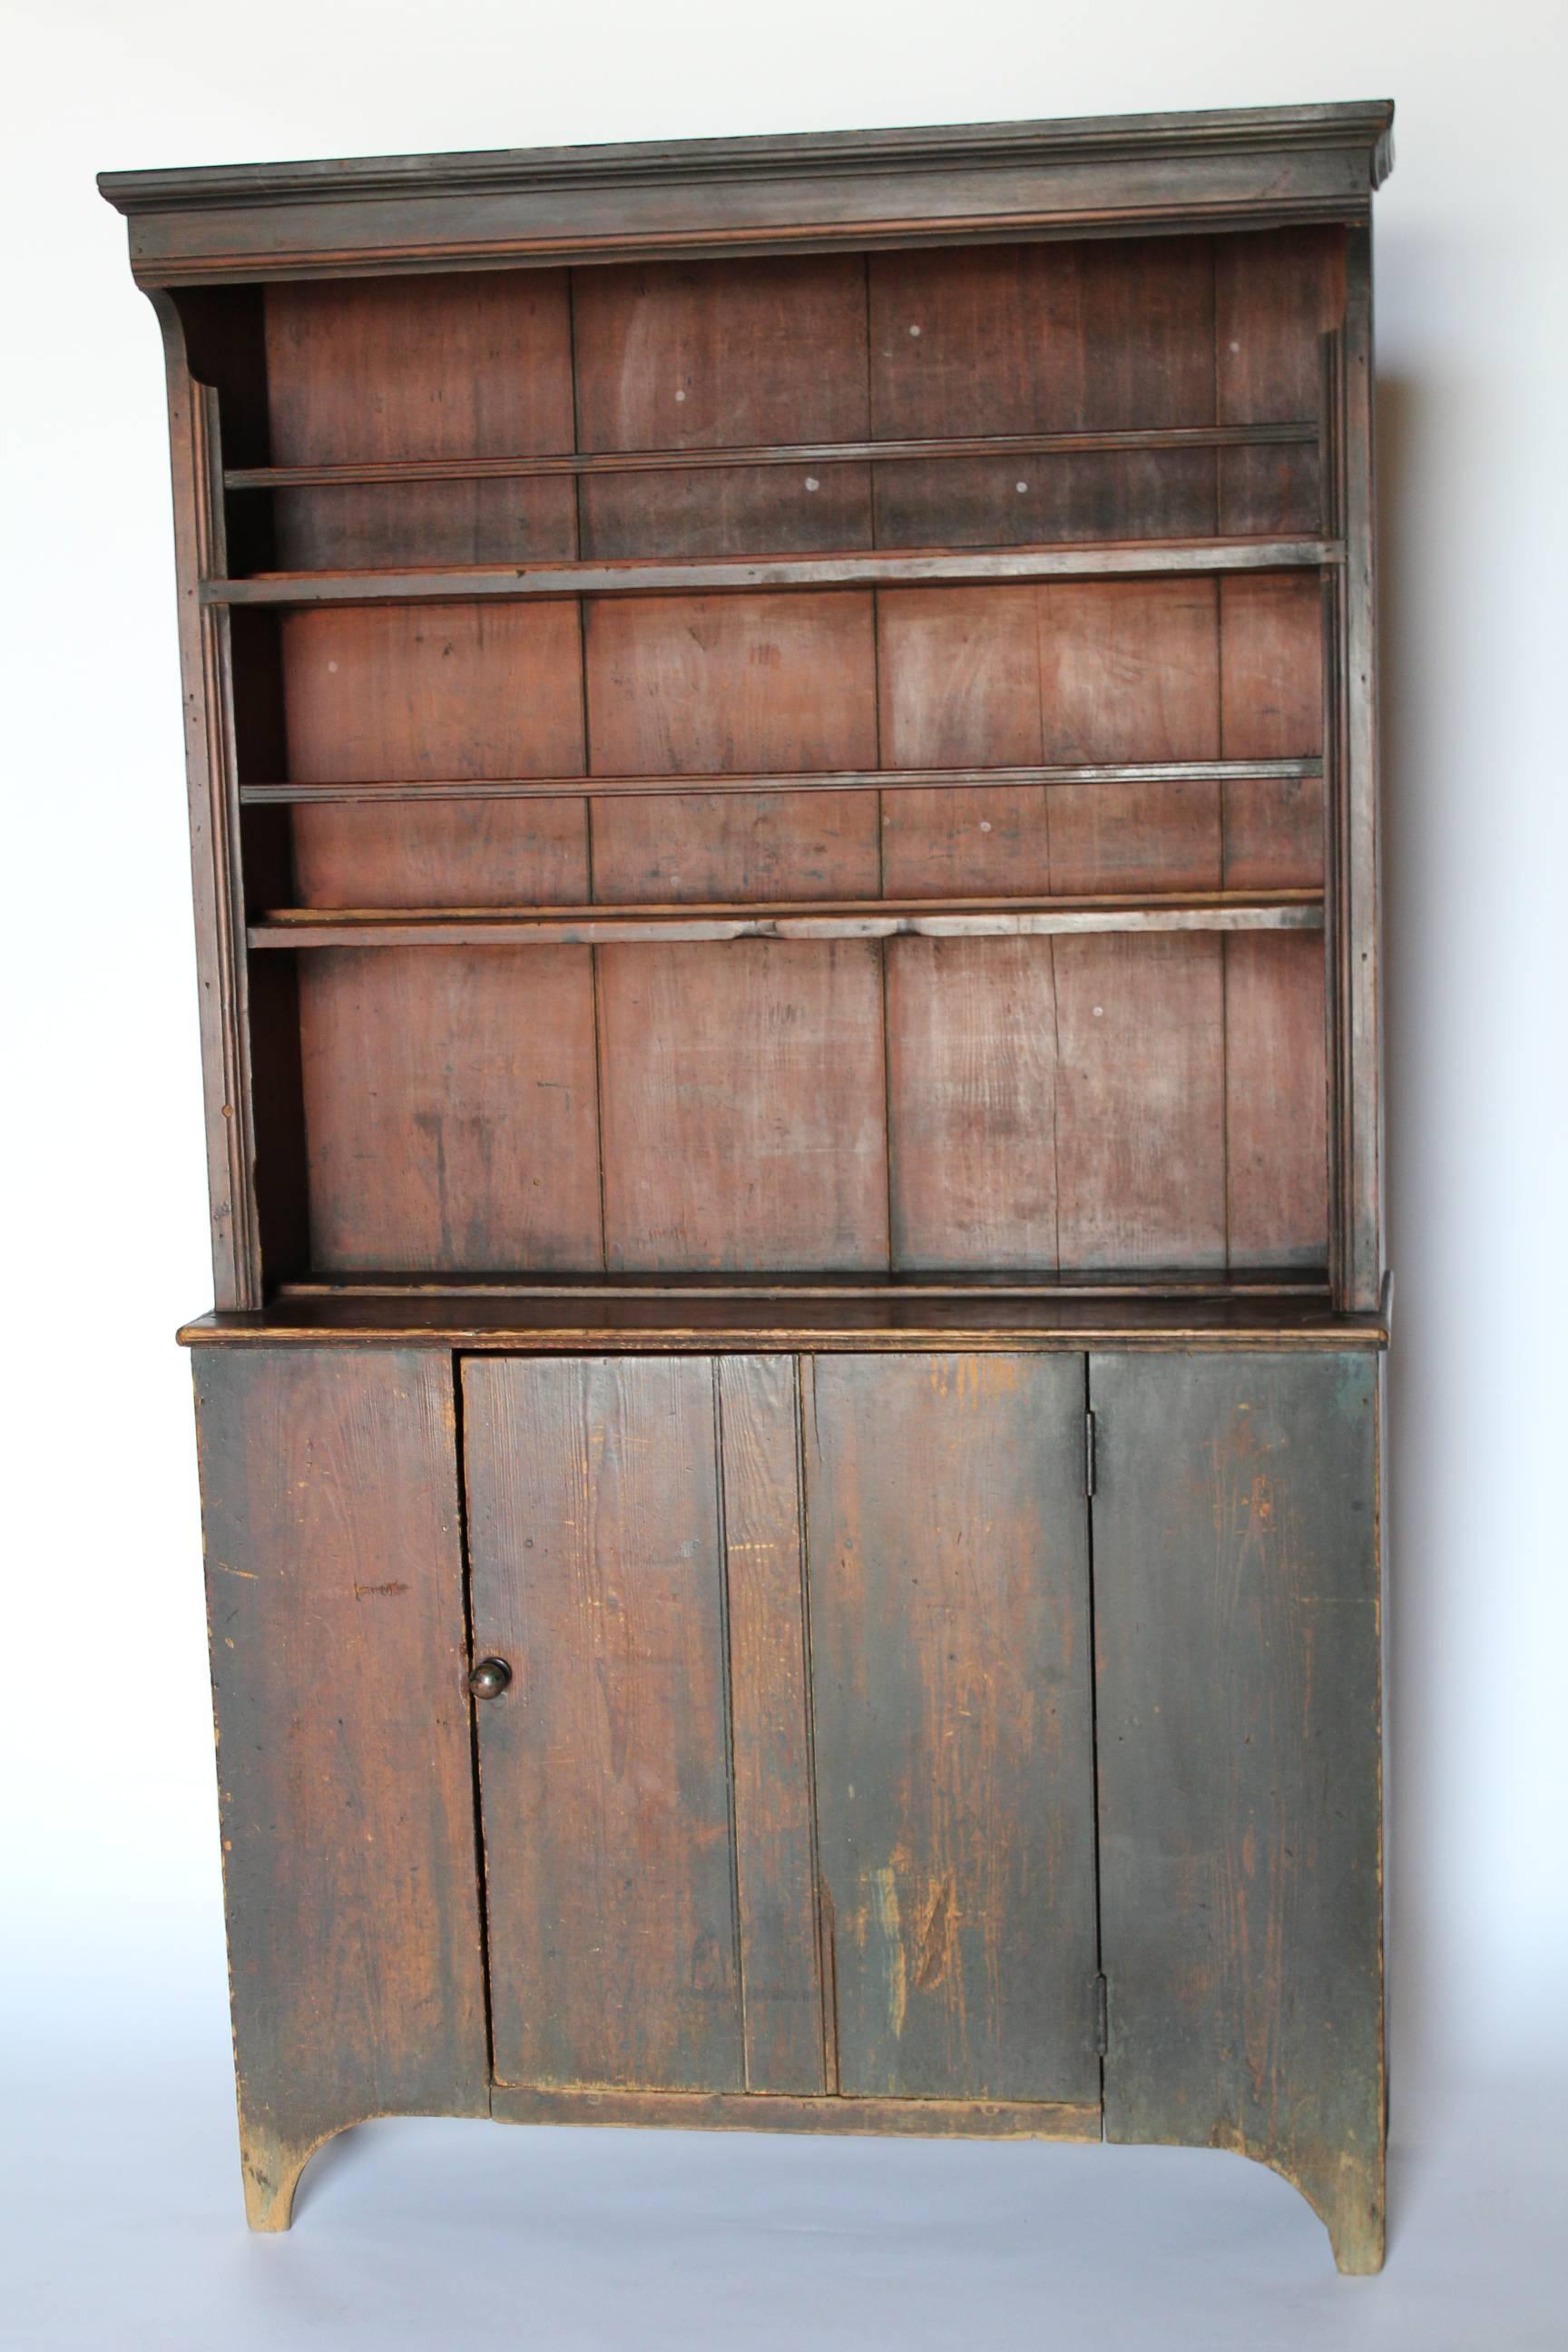 A Southern step-back cupboard of pleasing proportions featuring a rare, hooded cornice top. This cupboard is constructed of long-grain Southern pine and retains its original blue-painted exterior, which has darkened over time, and red-painted